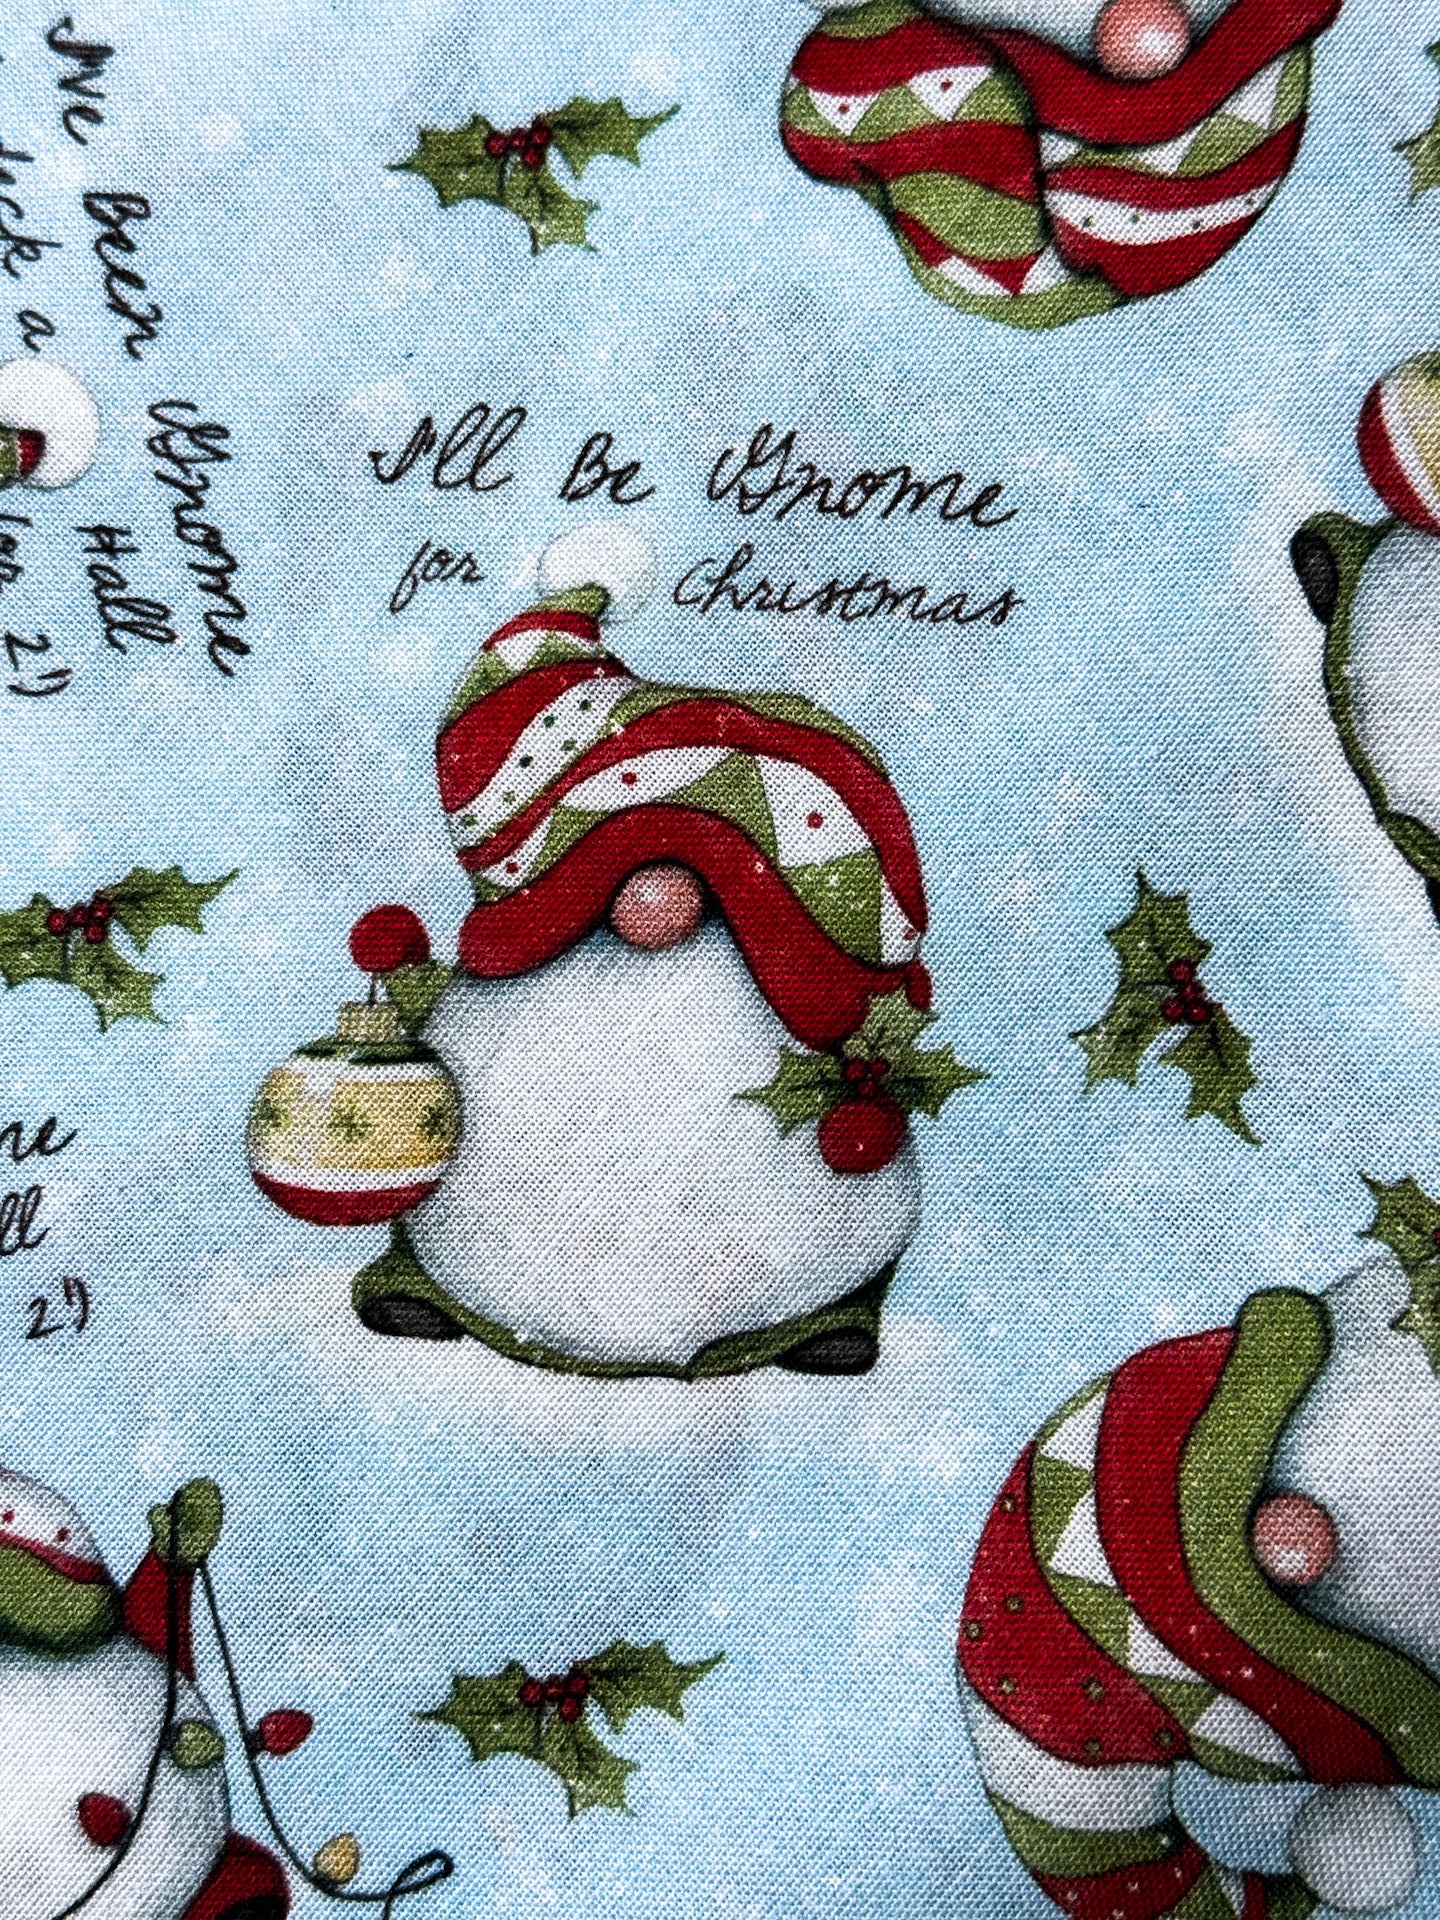 Gnome for Christmas fabric Gnomes quilting fabric